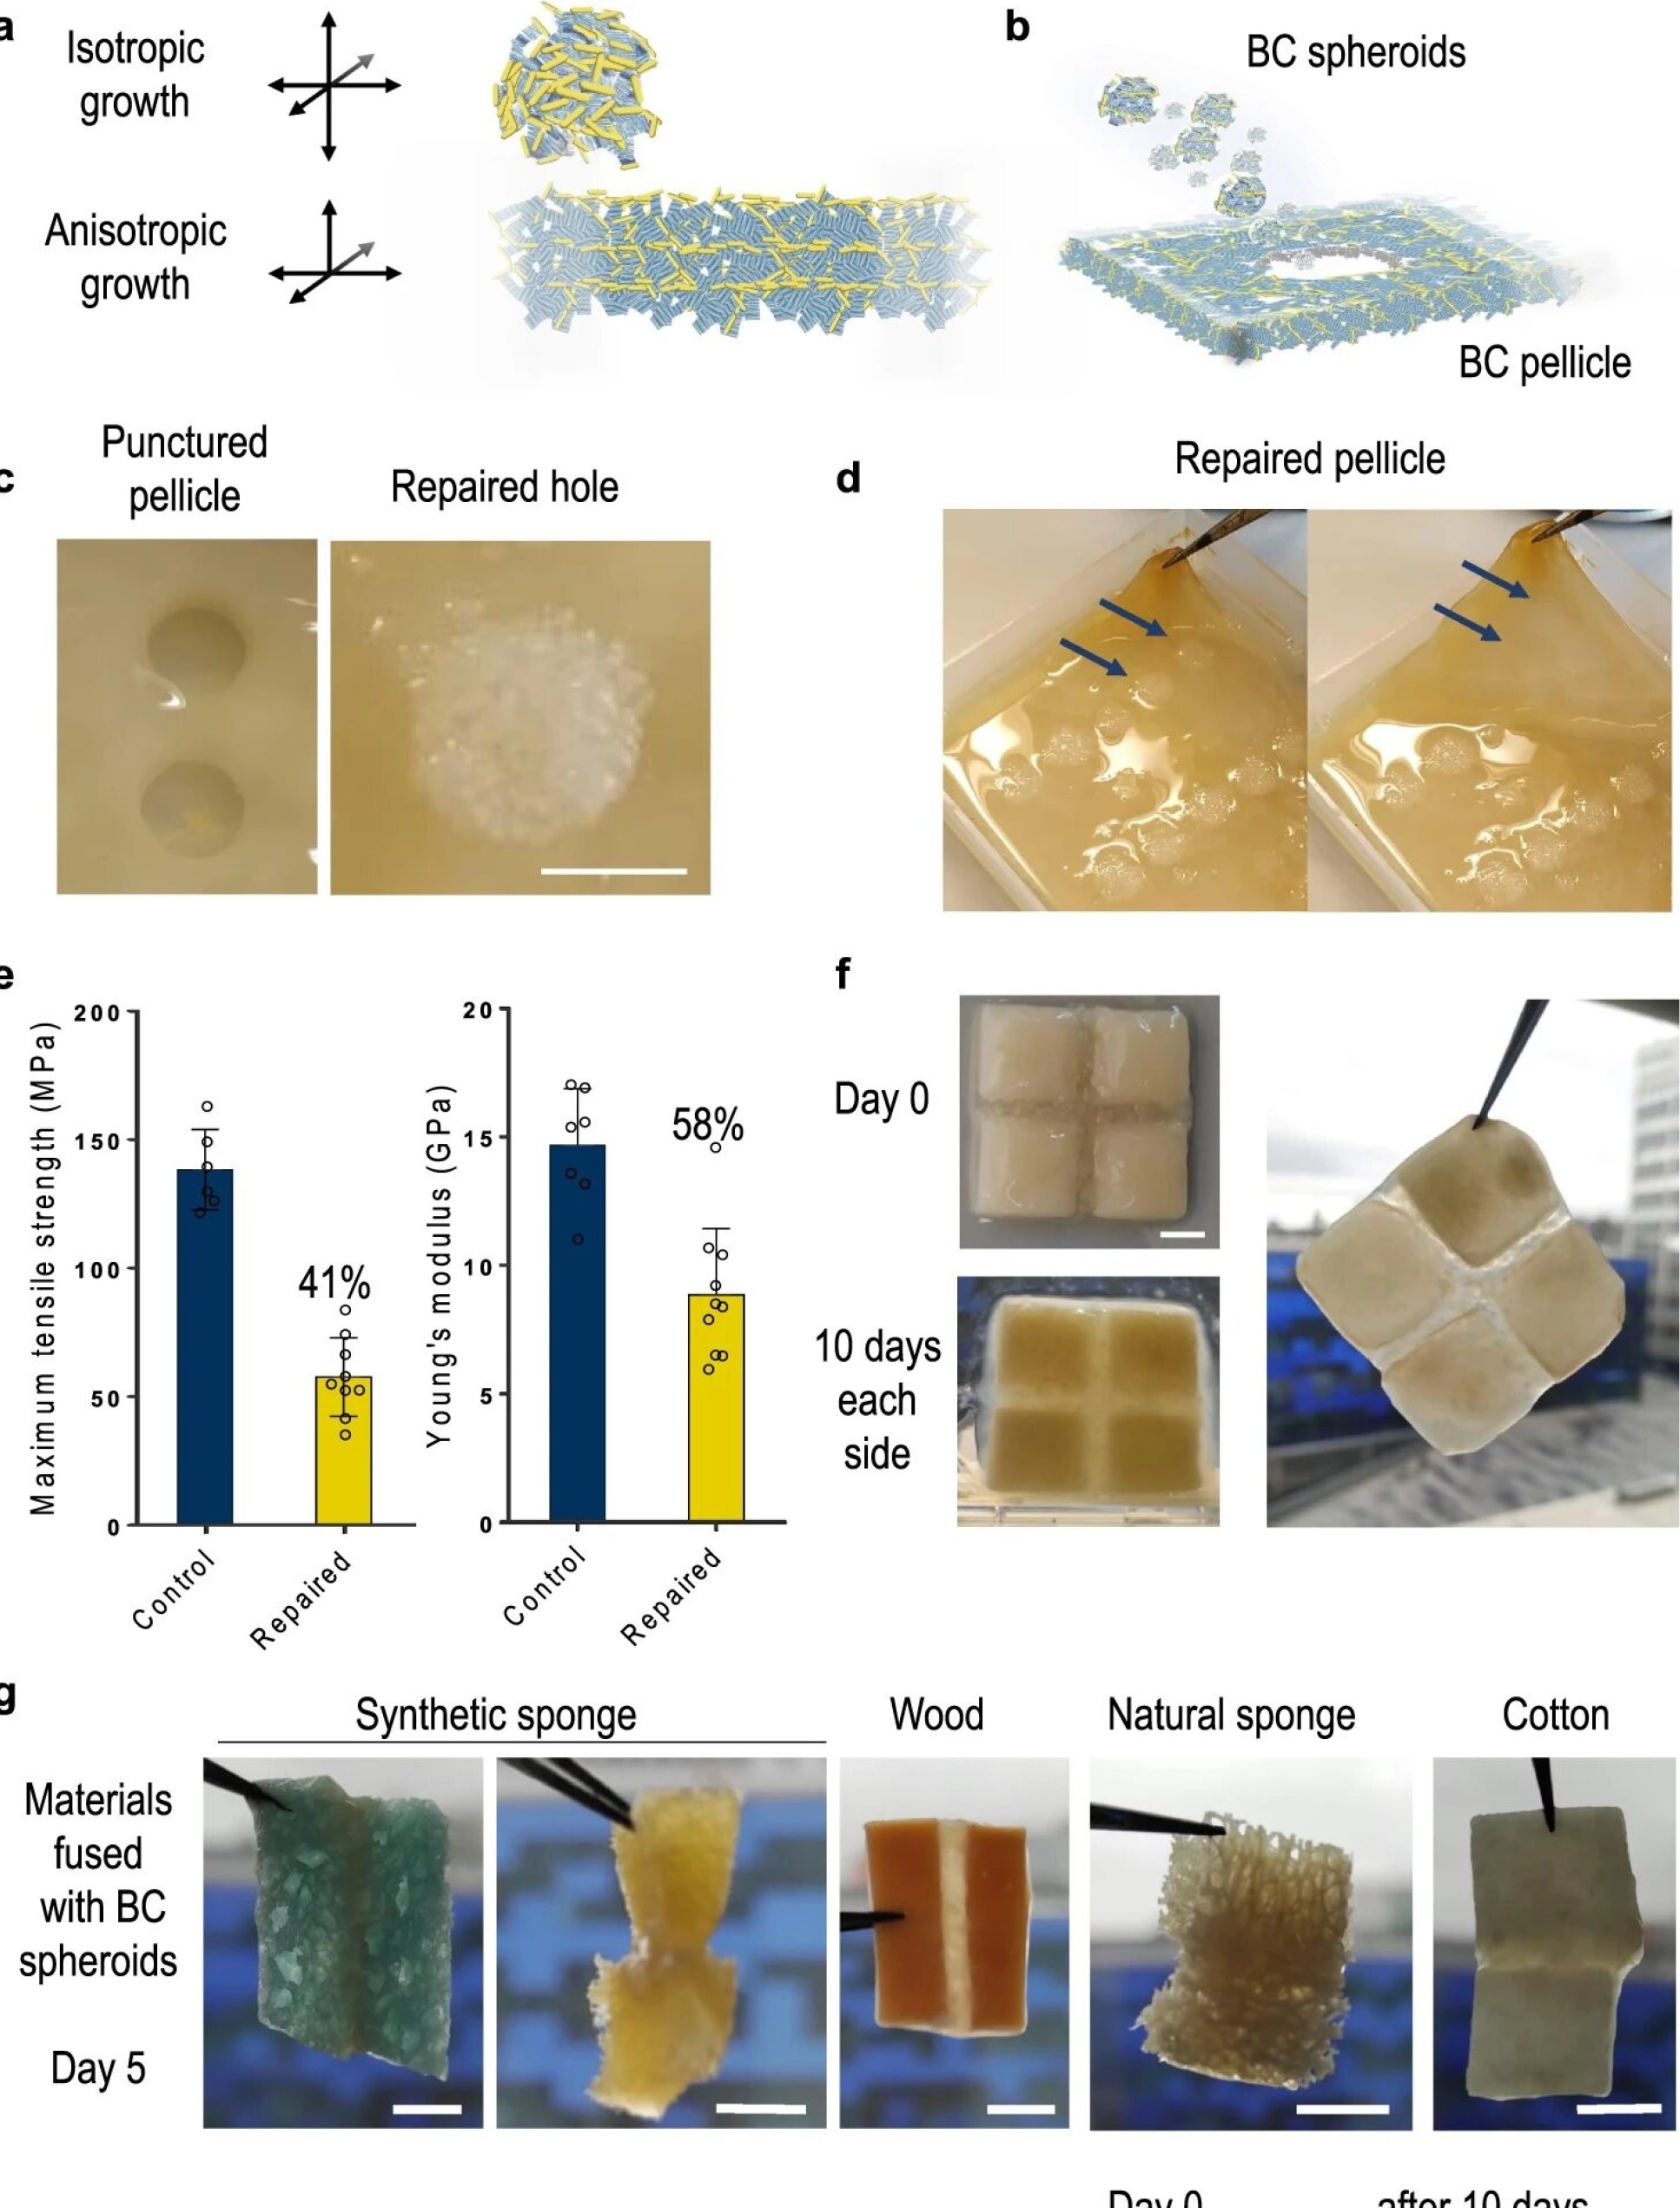 Photos showing repair of holes in the bacterial cellulose